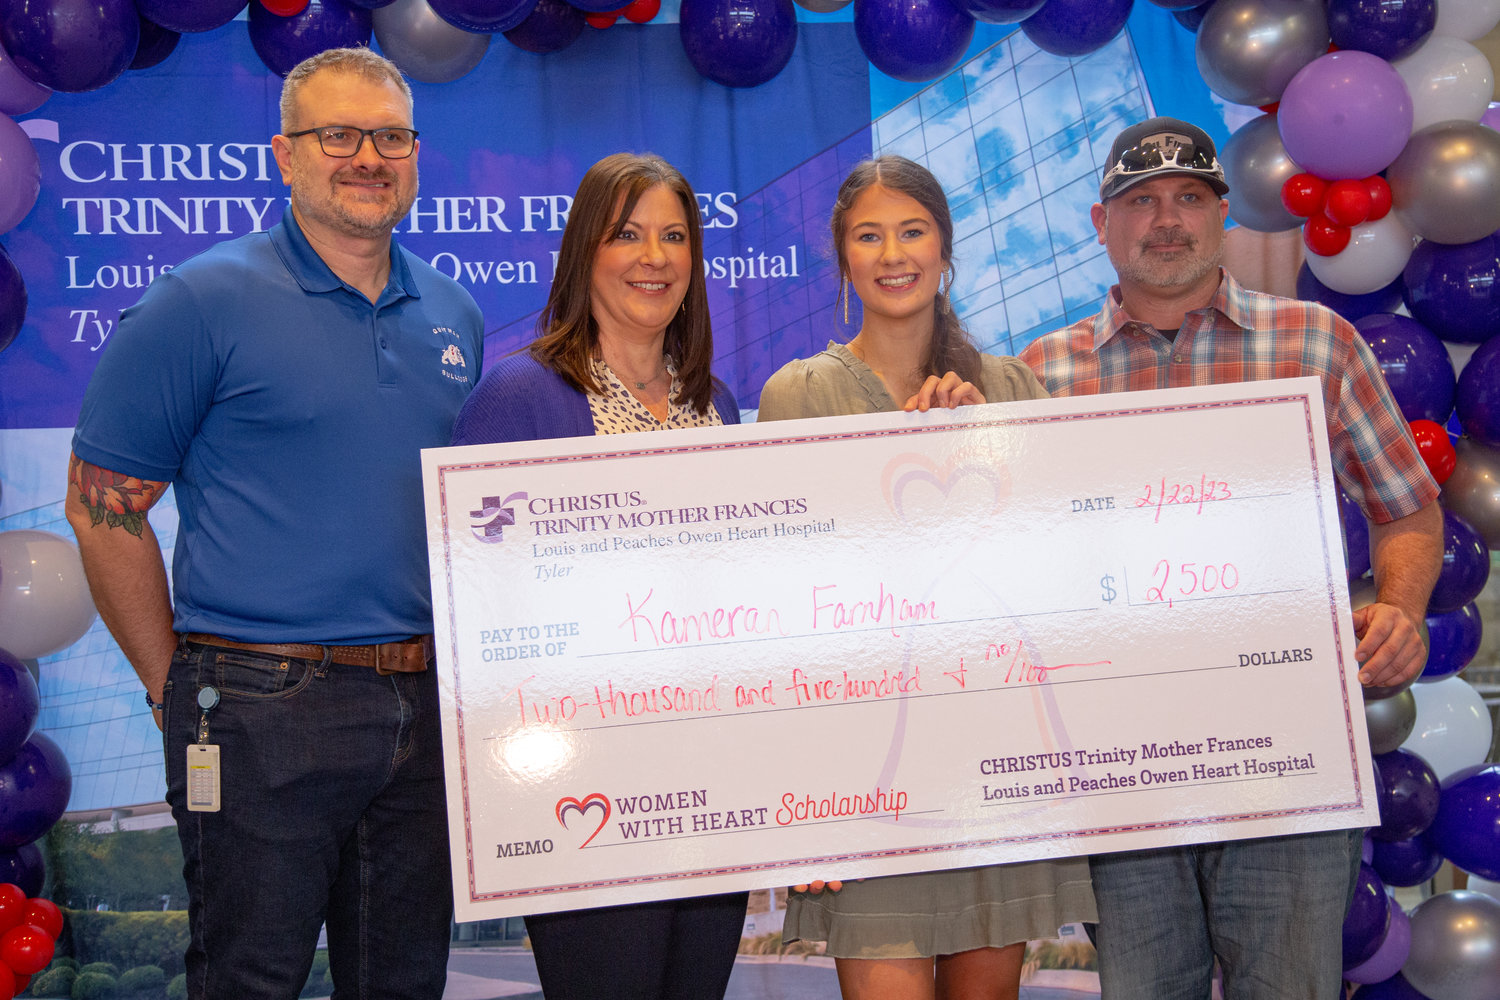 Kameran Farnham of Quitman High School (third from left) was awarded second place and a $2,500 scholarship in the Christus Trinity Mother Frances “Women with Heart” contest with her video focused on building awareness of heart disease, specifically among women.